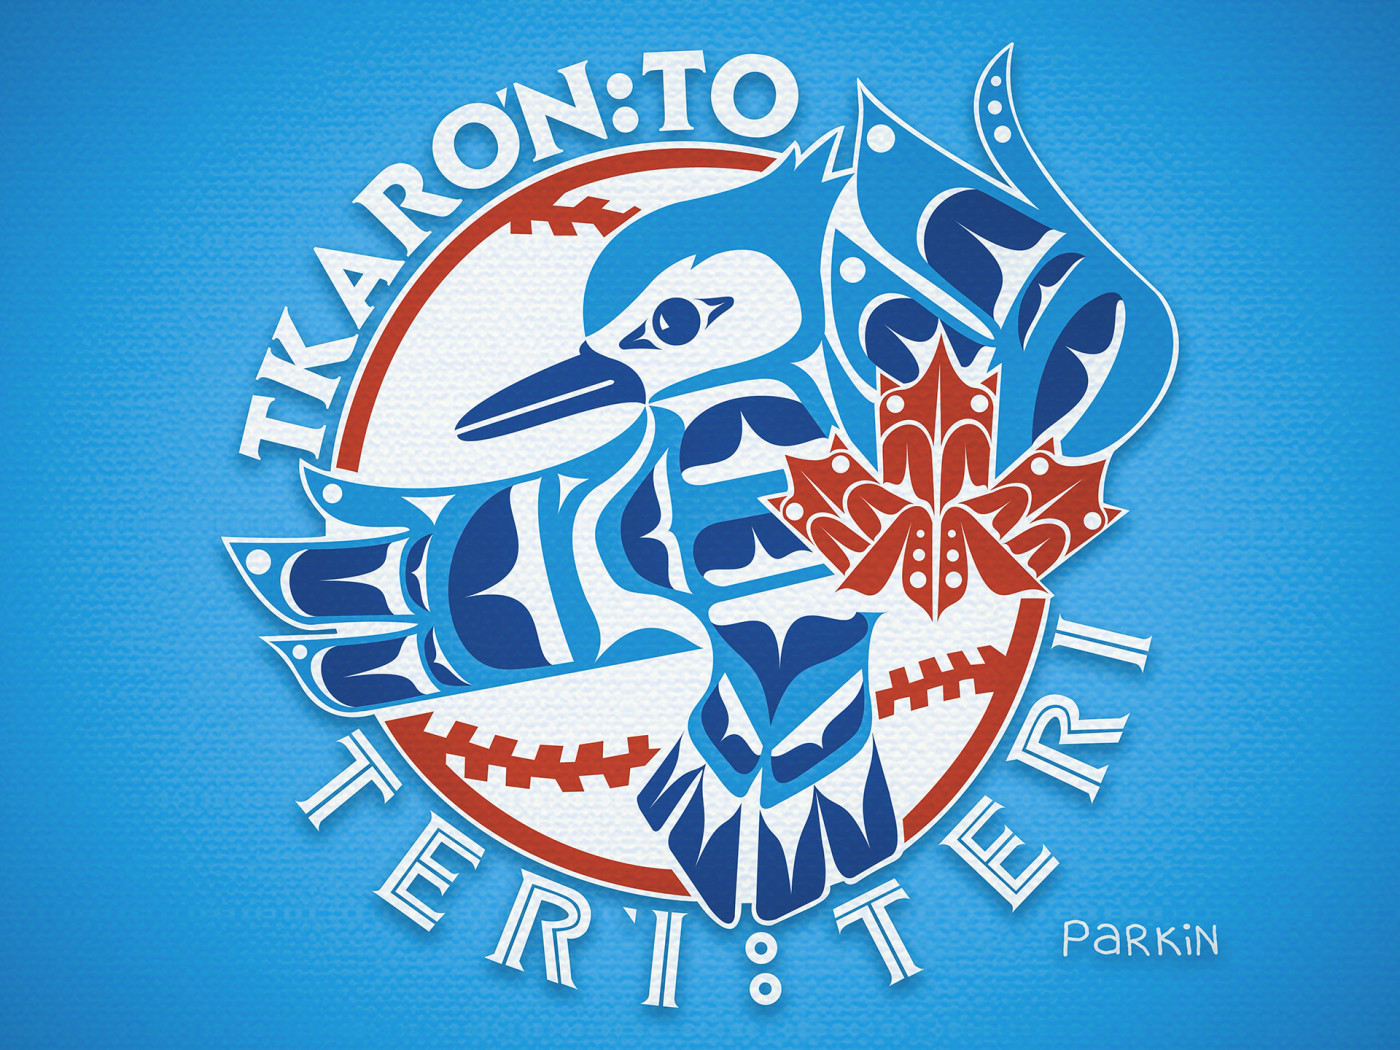 Do we know if the Blue Jays are getting city connect jerseys this